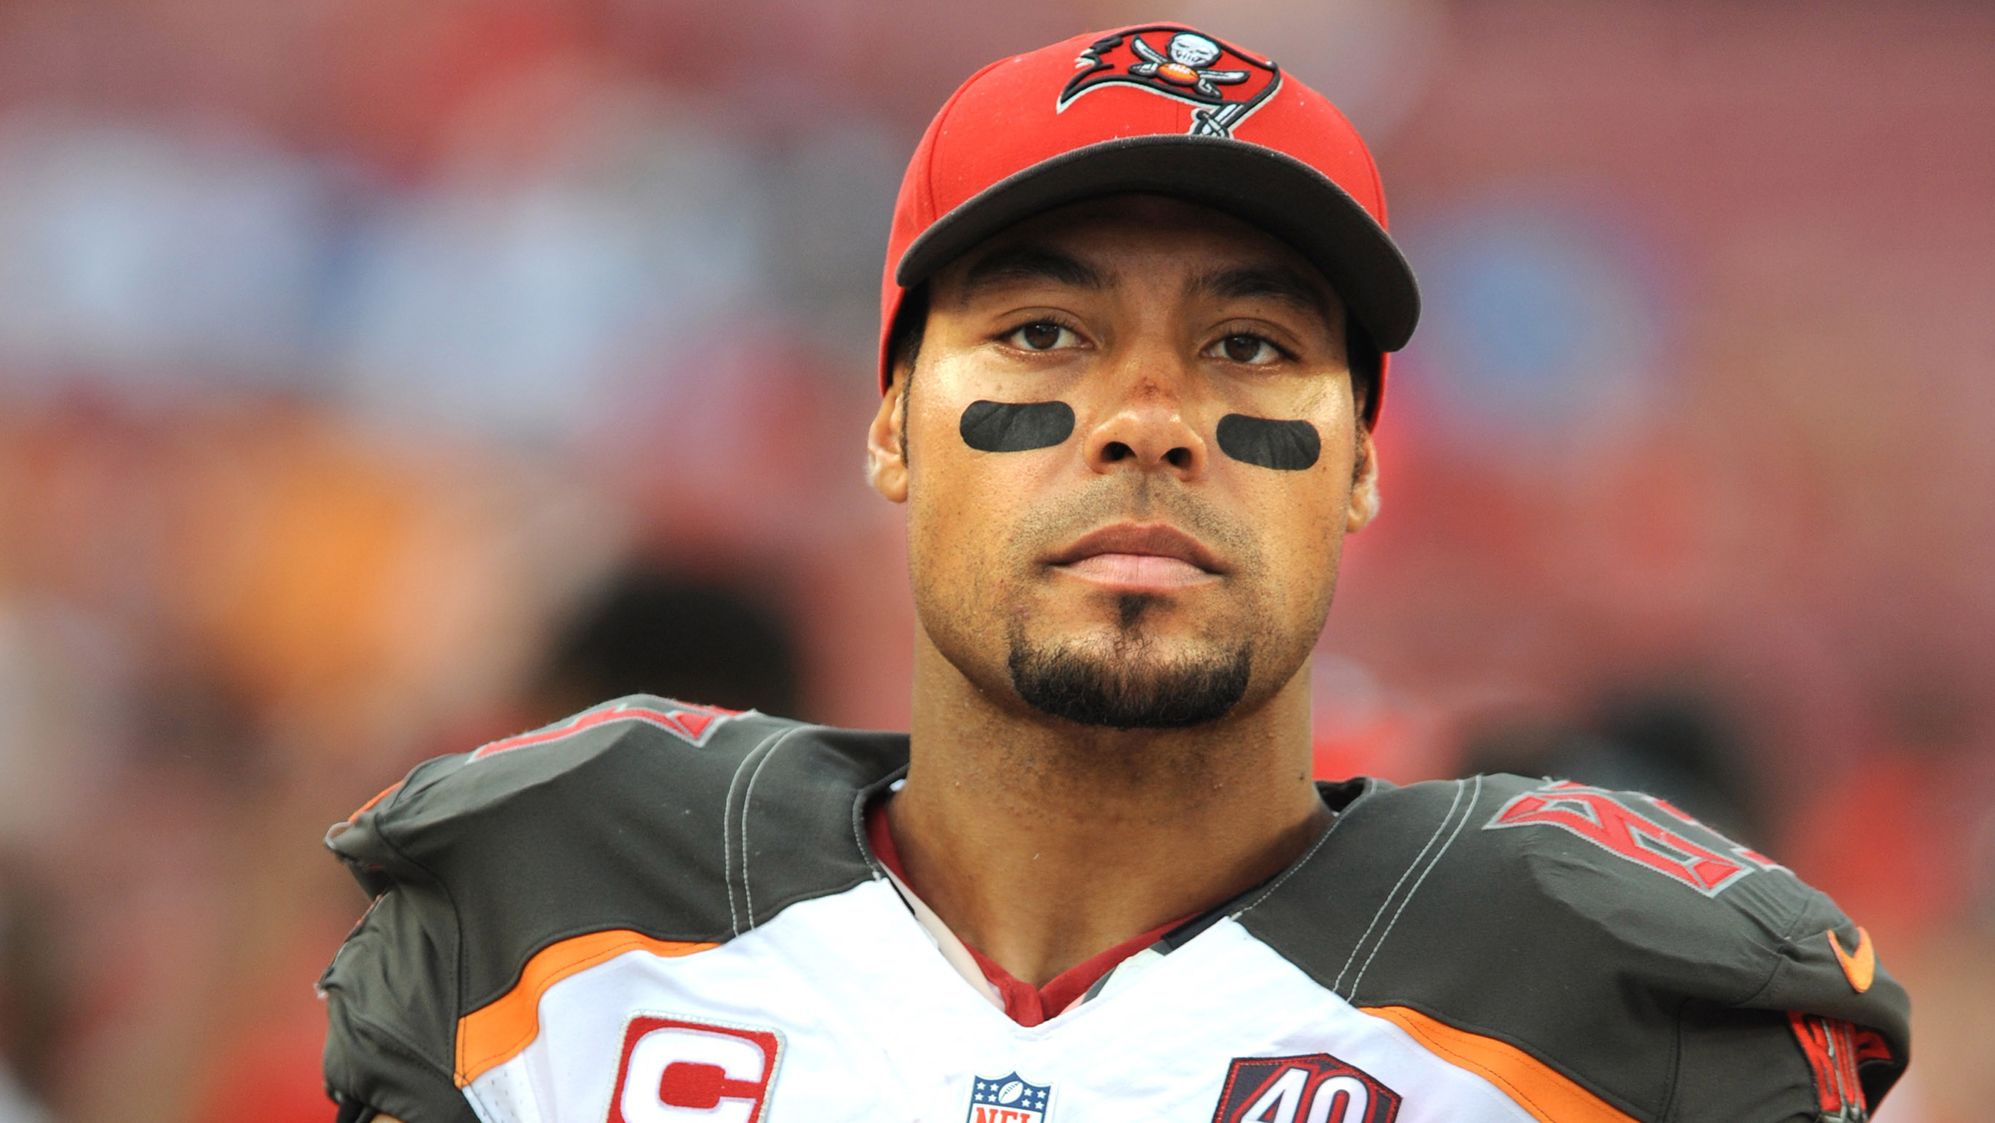 Jackson, who played for the Tampa Bay Buccaneers, was found to have Stage 2 CTE, CNN reported.